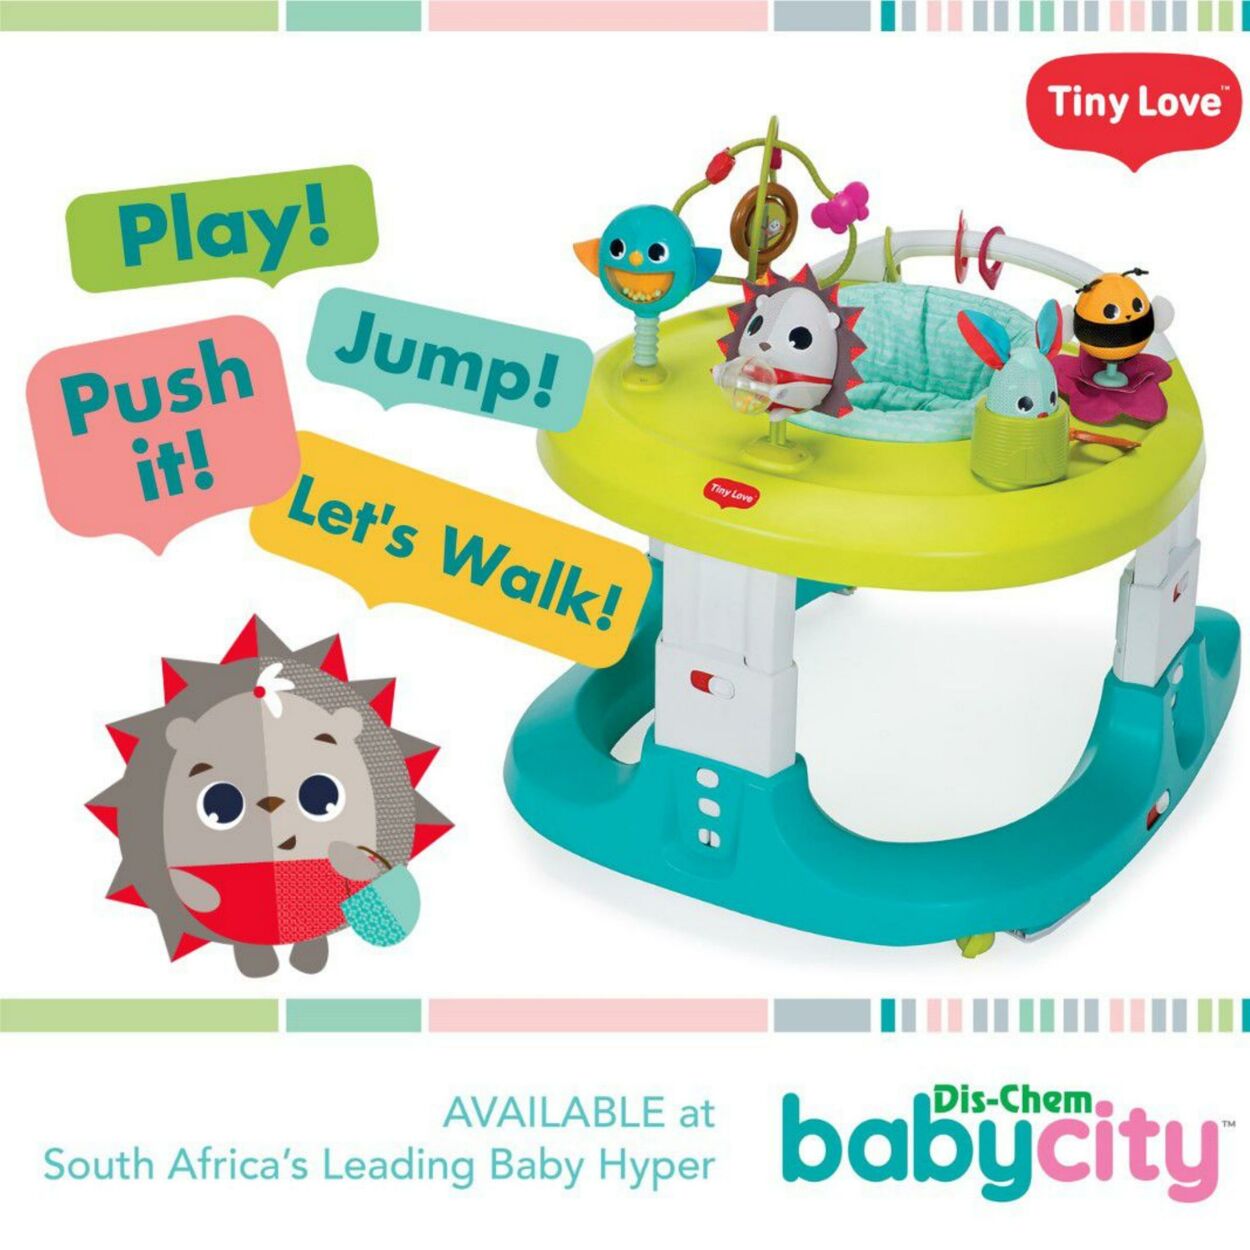 Special Baby City 01.05.2023 - 31.05.2023